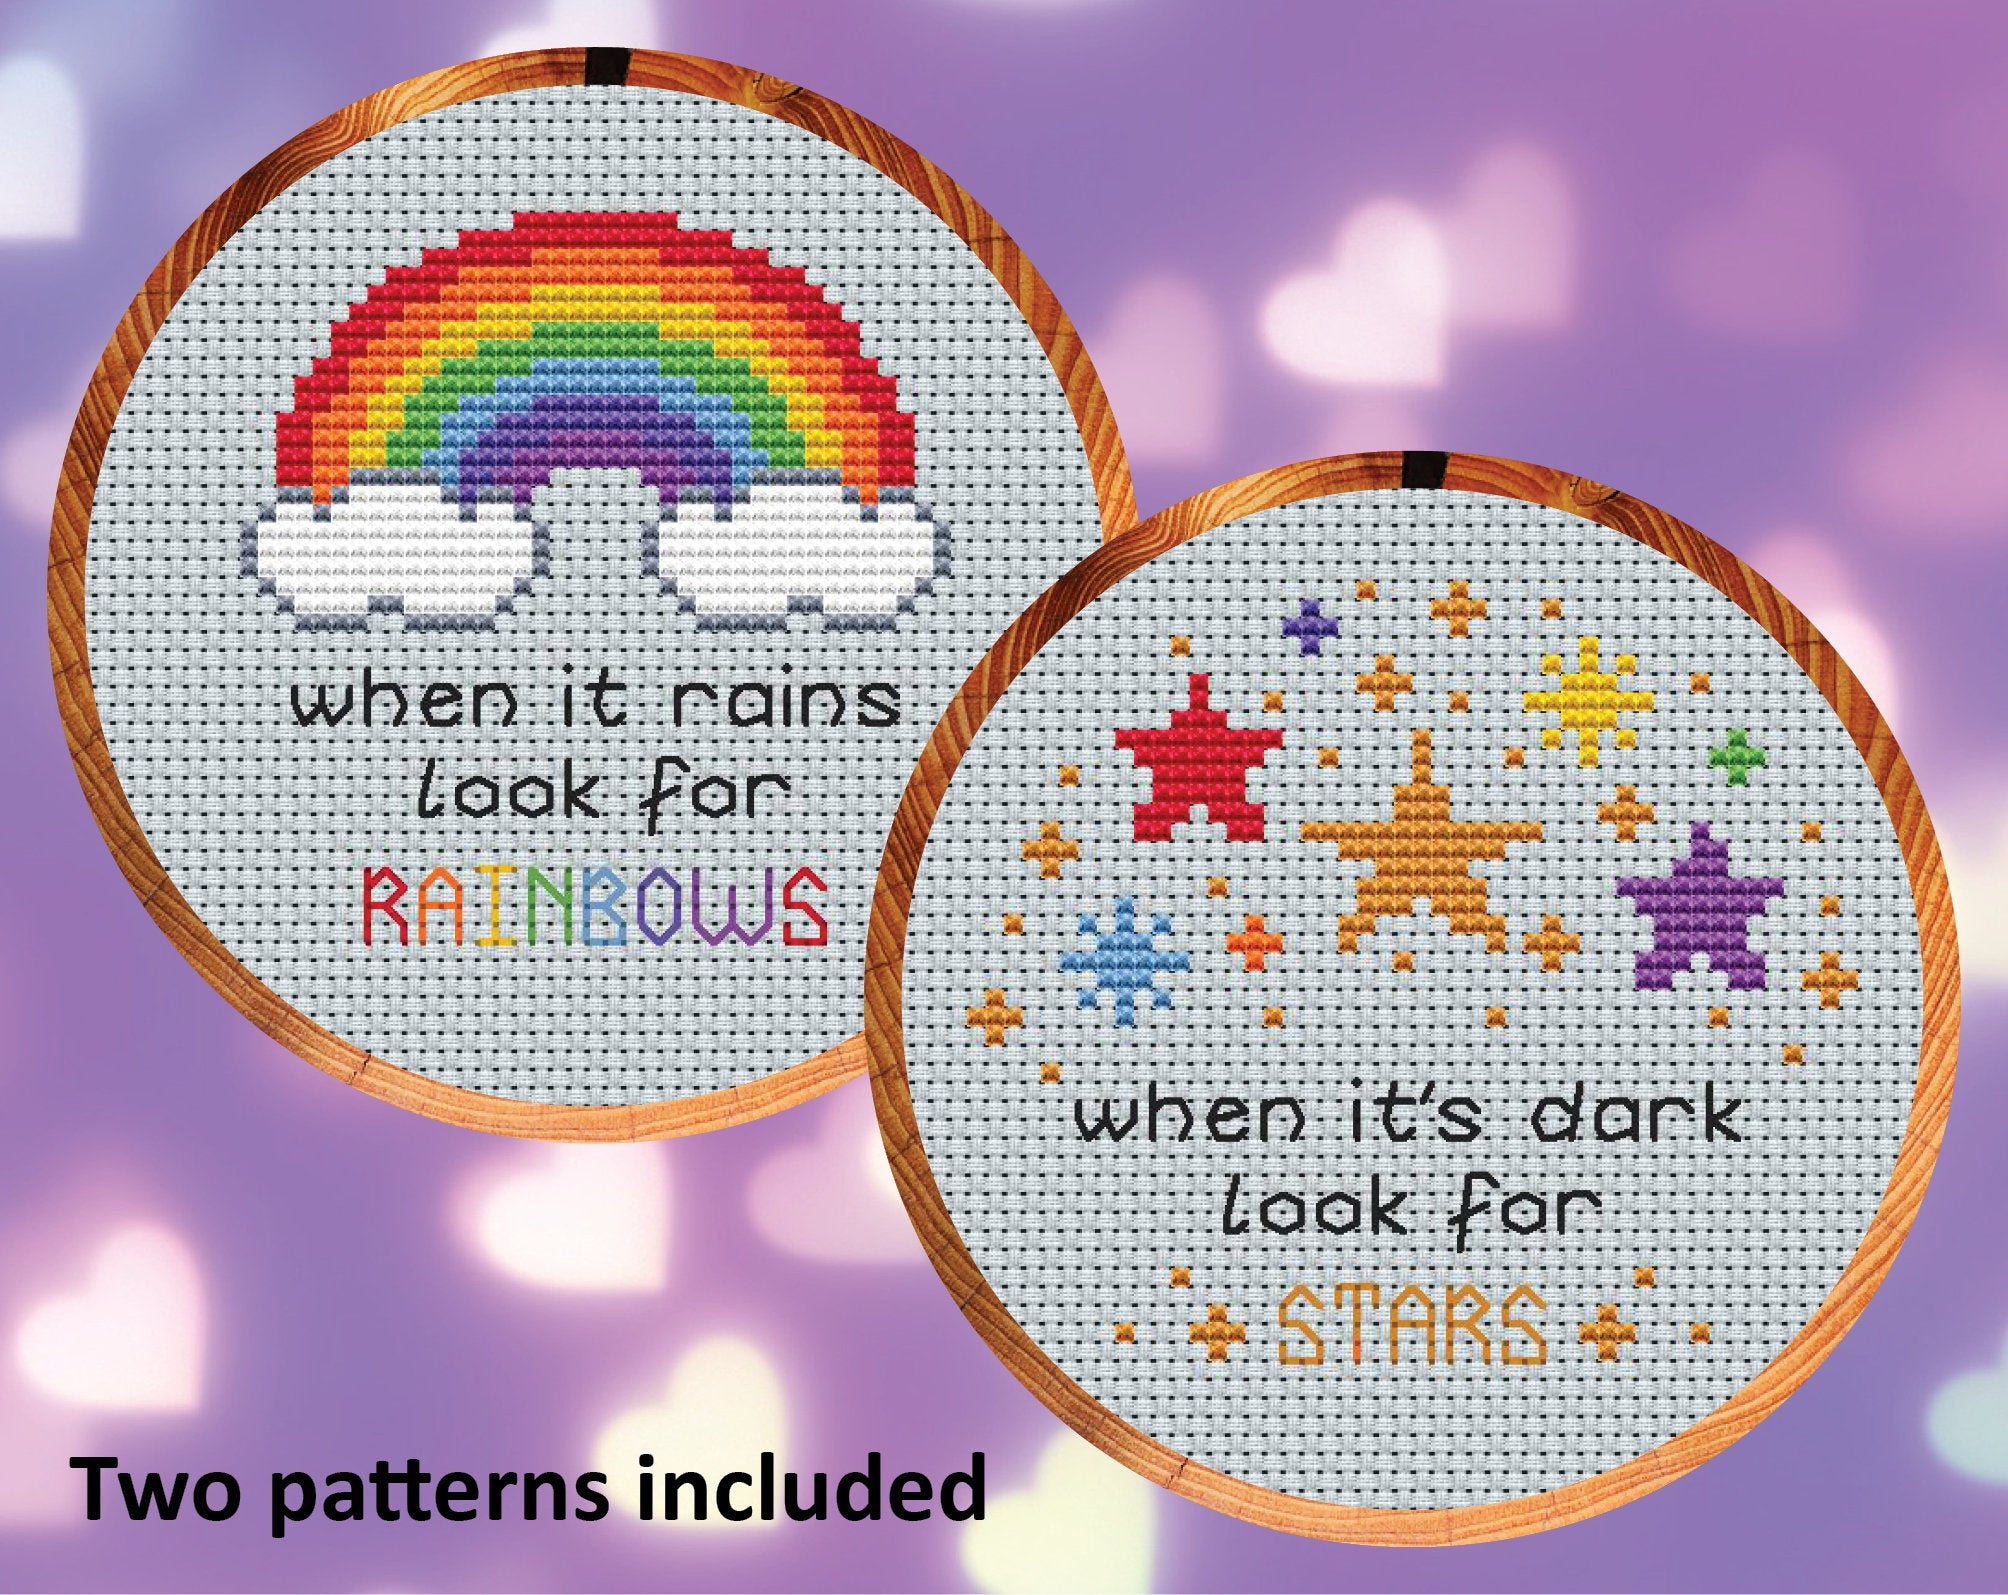 Uplifting Quotes mini cross stitch patterns - 'When It Rains Look For Rainbows' and 'When It's Dark Look For Stars'